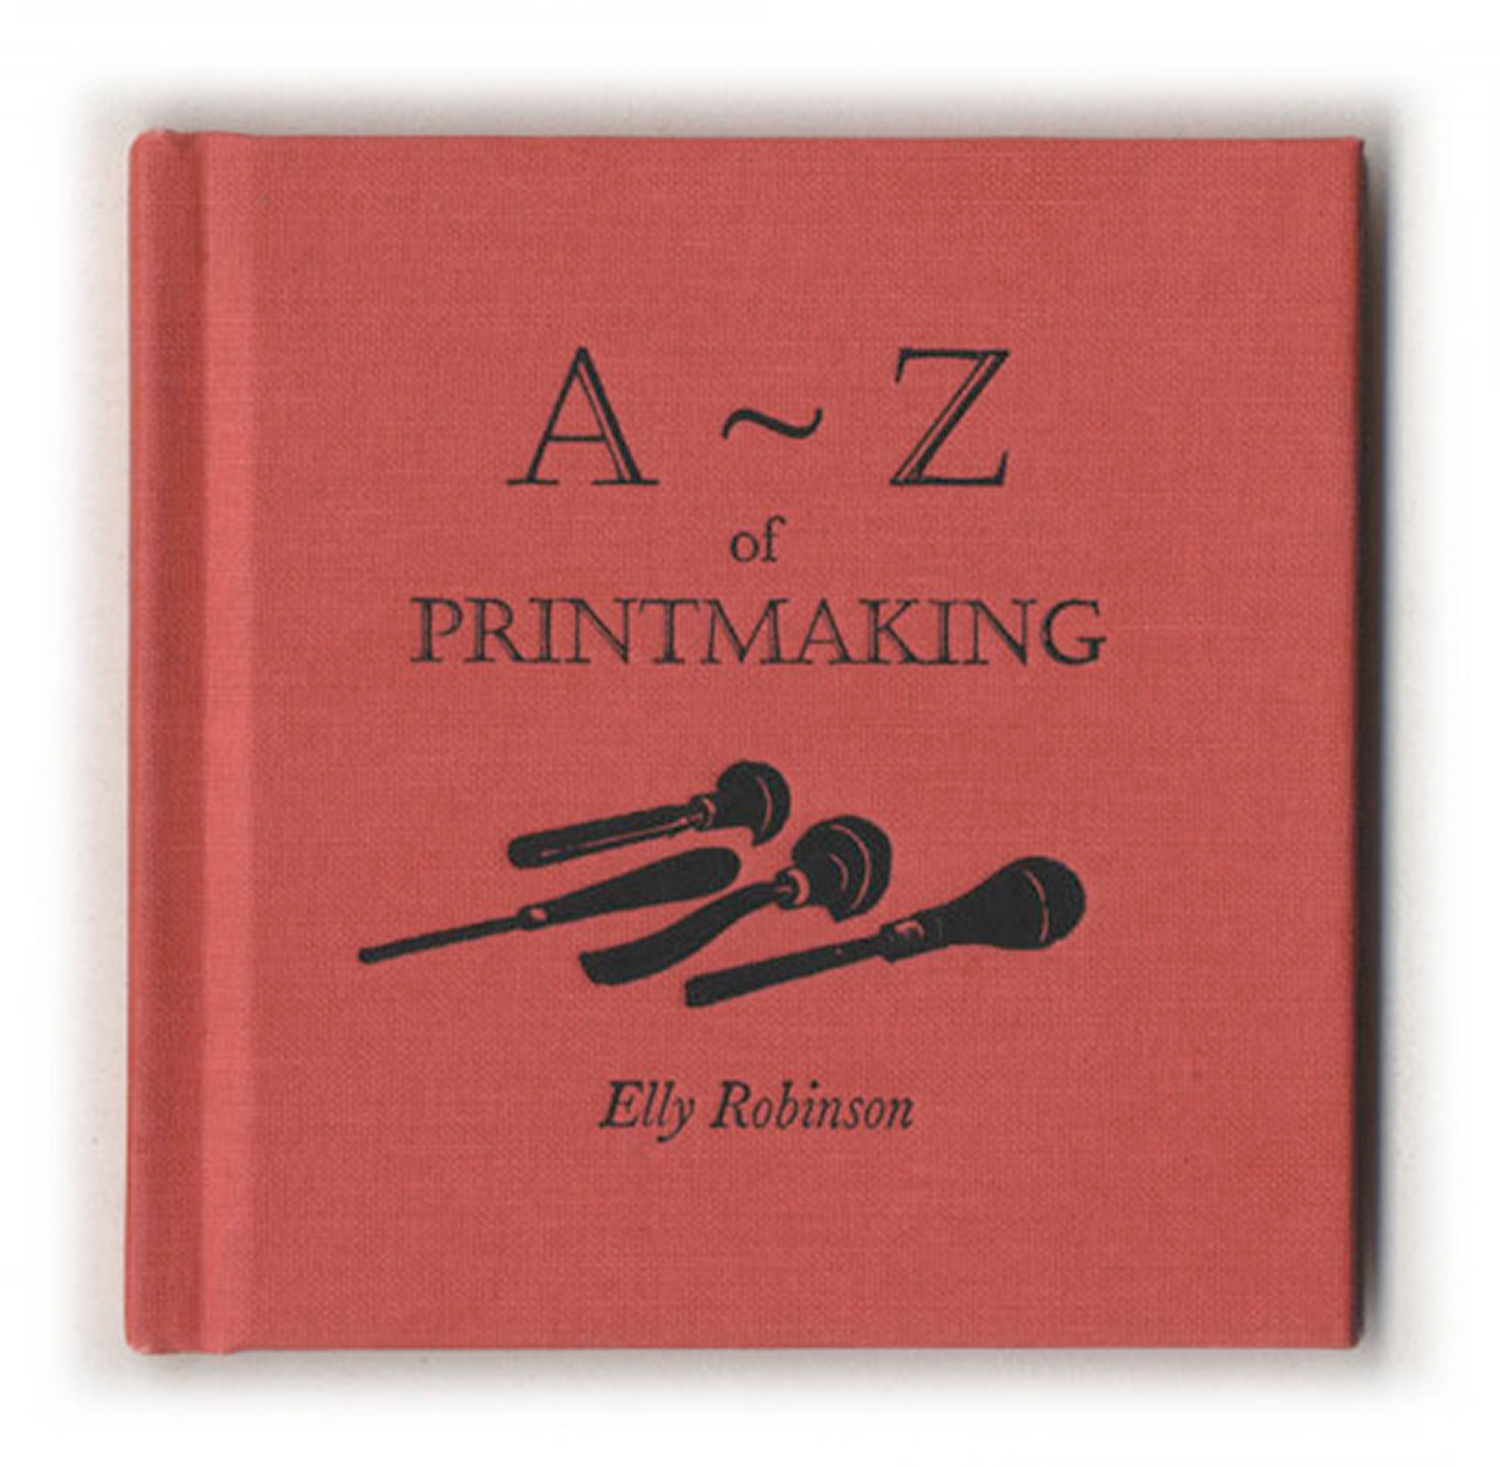 A-Z of Printmaking by Elly Robinson